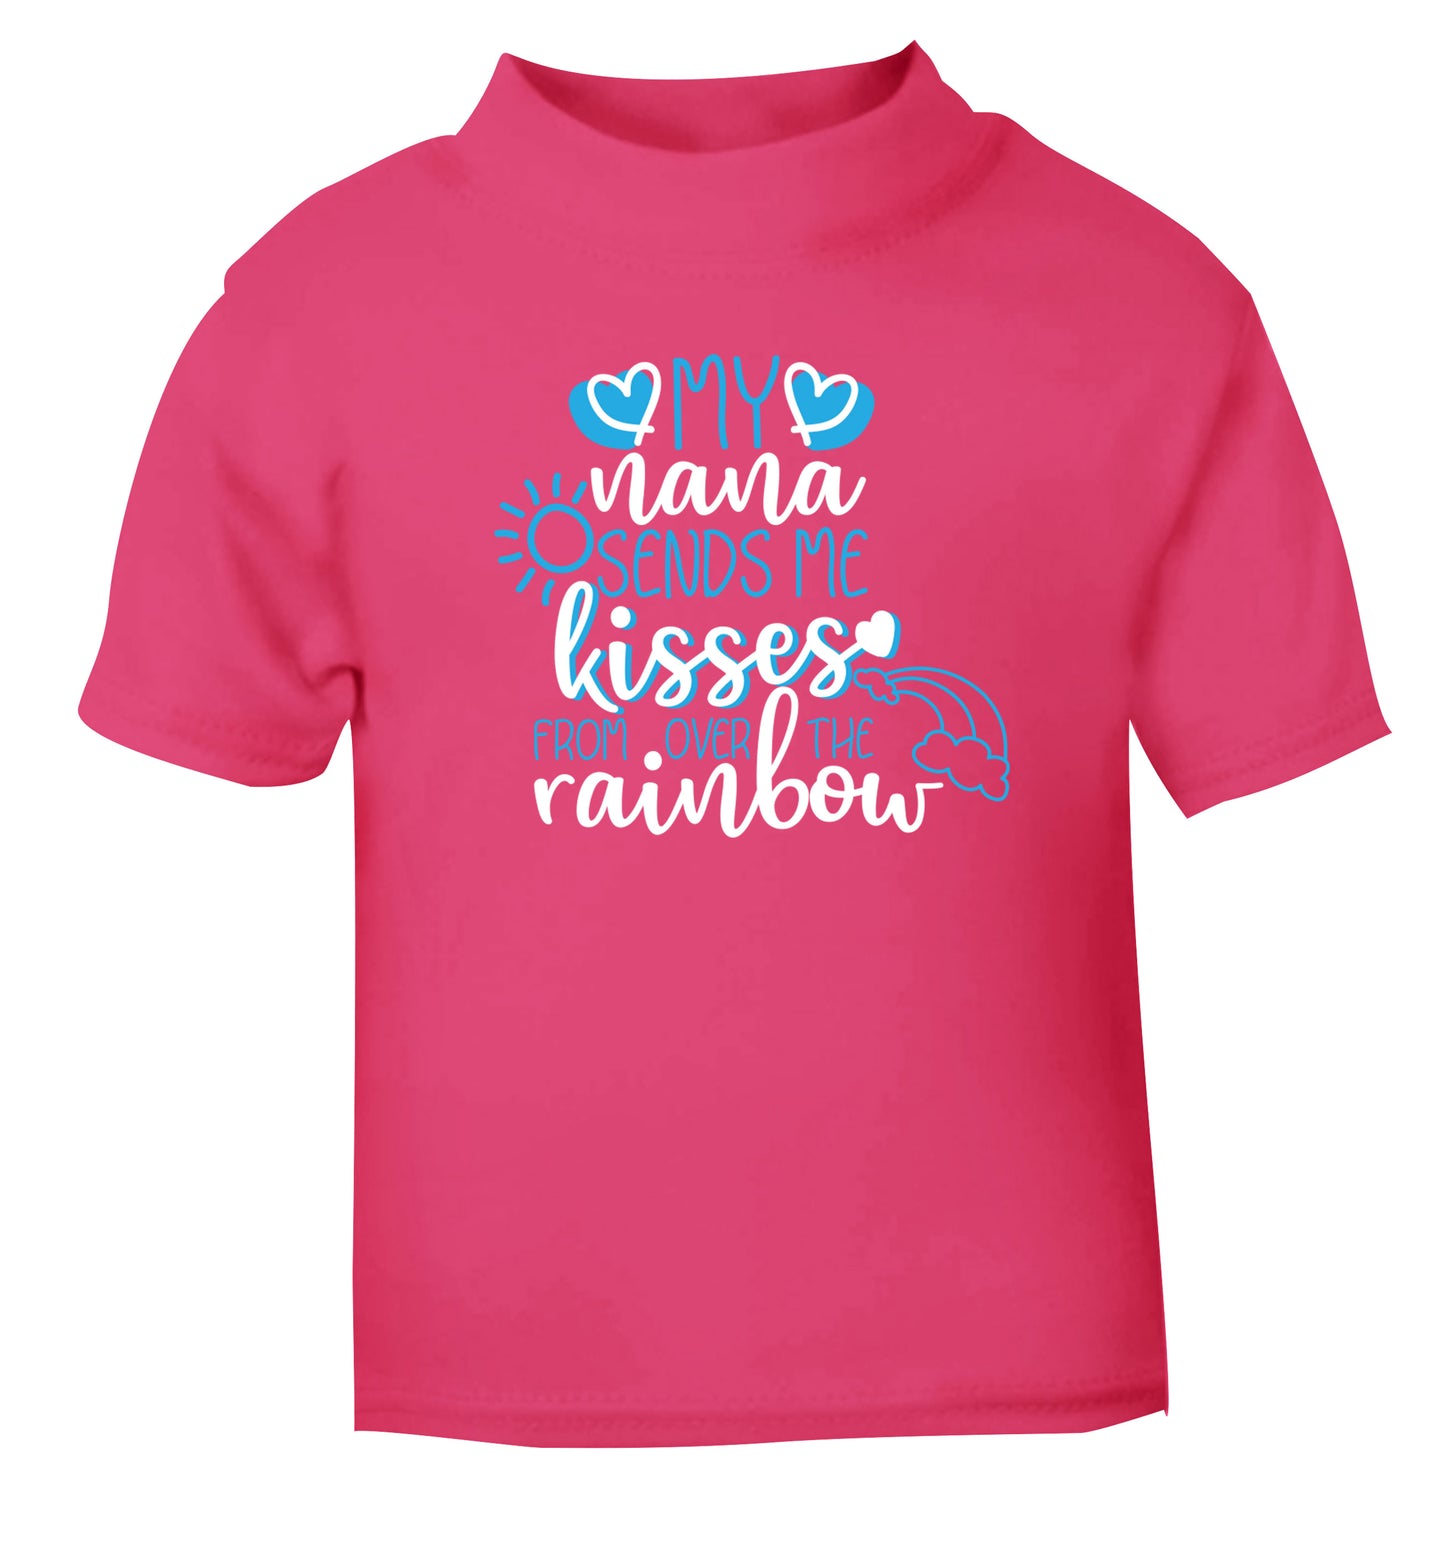 My nana sends me kisses from over the rainbow pink Baby Toddler Tshirt 2 Years